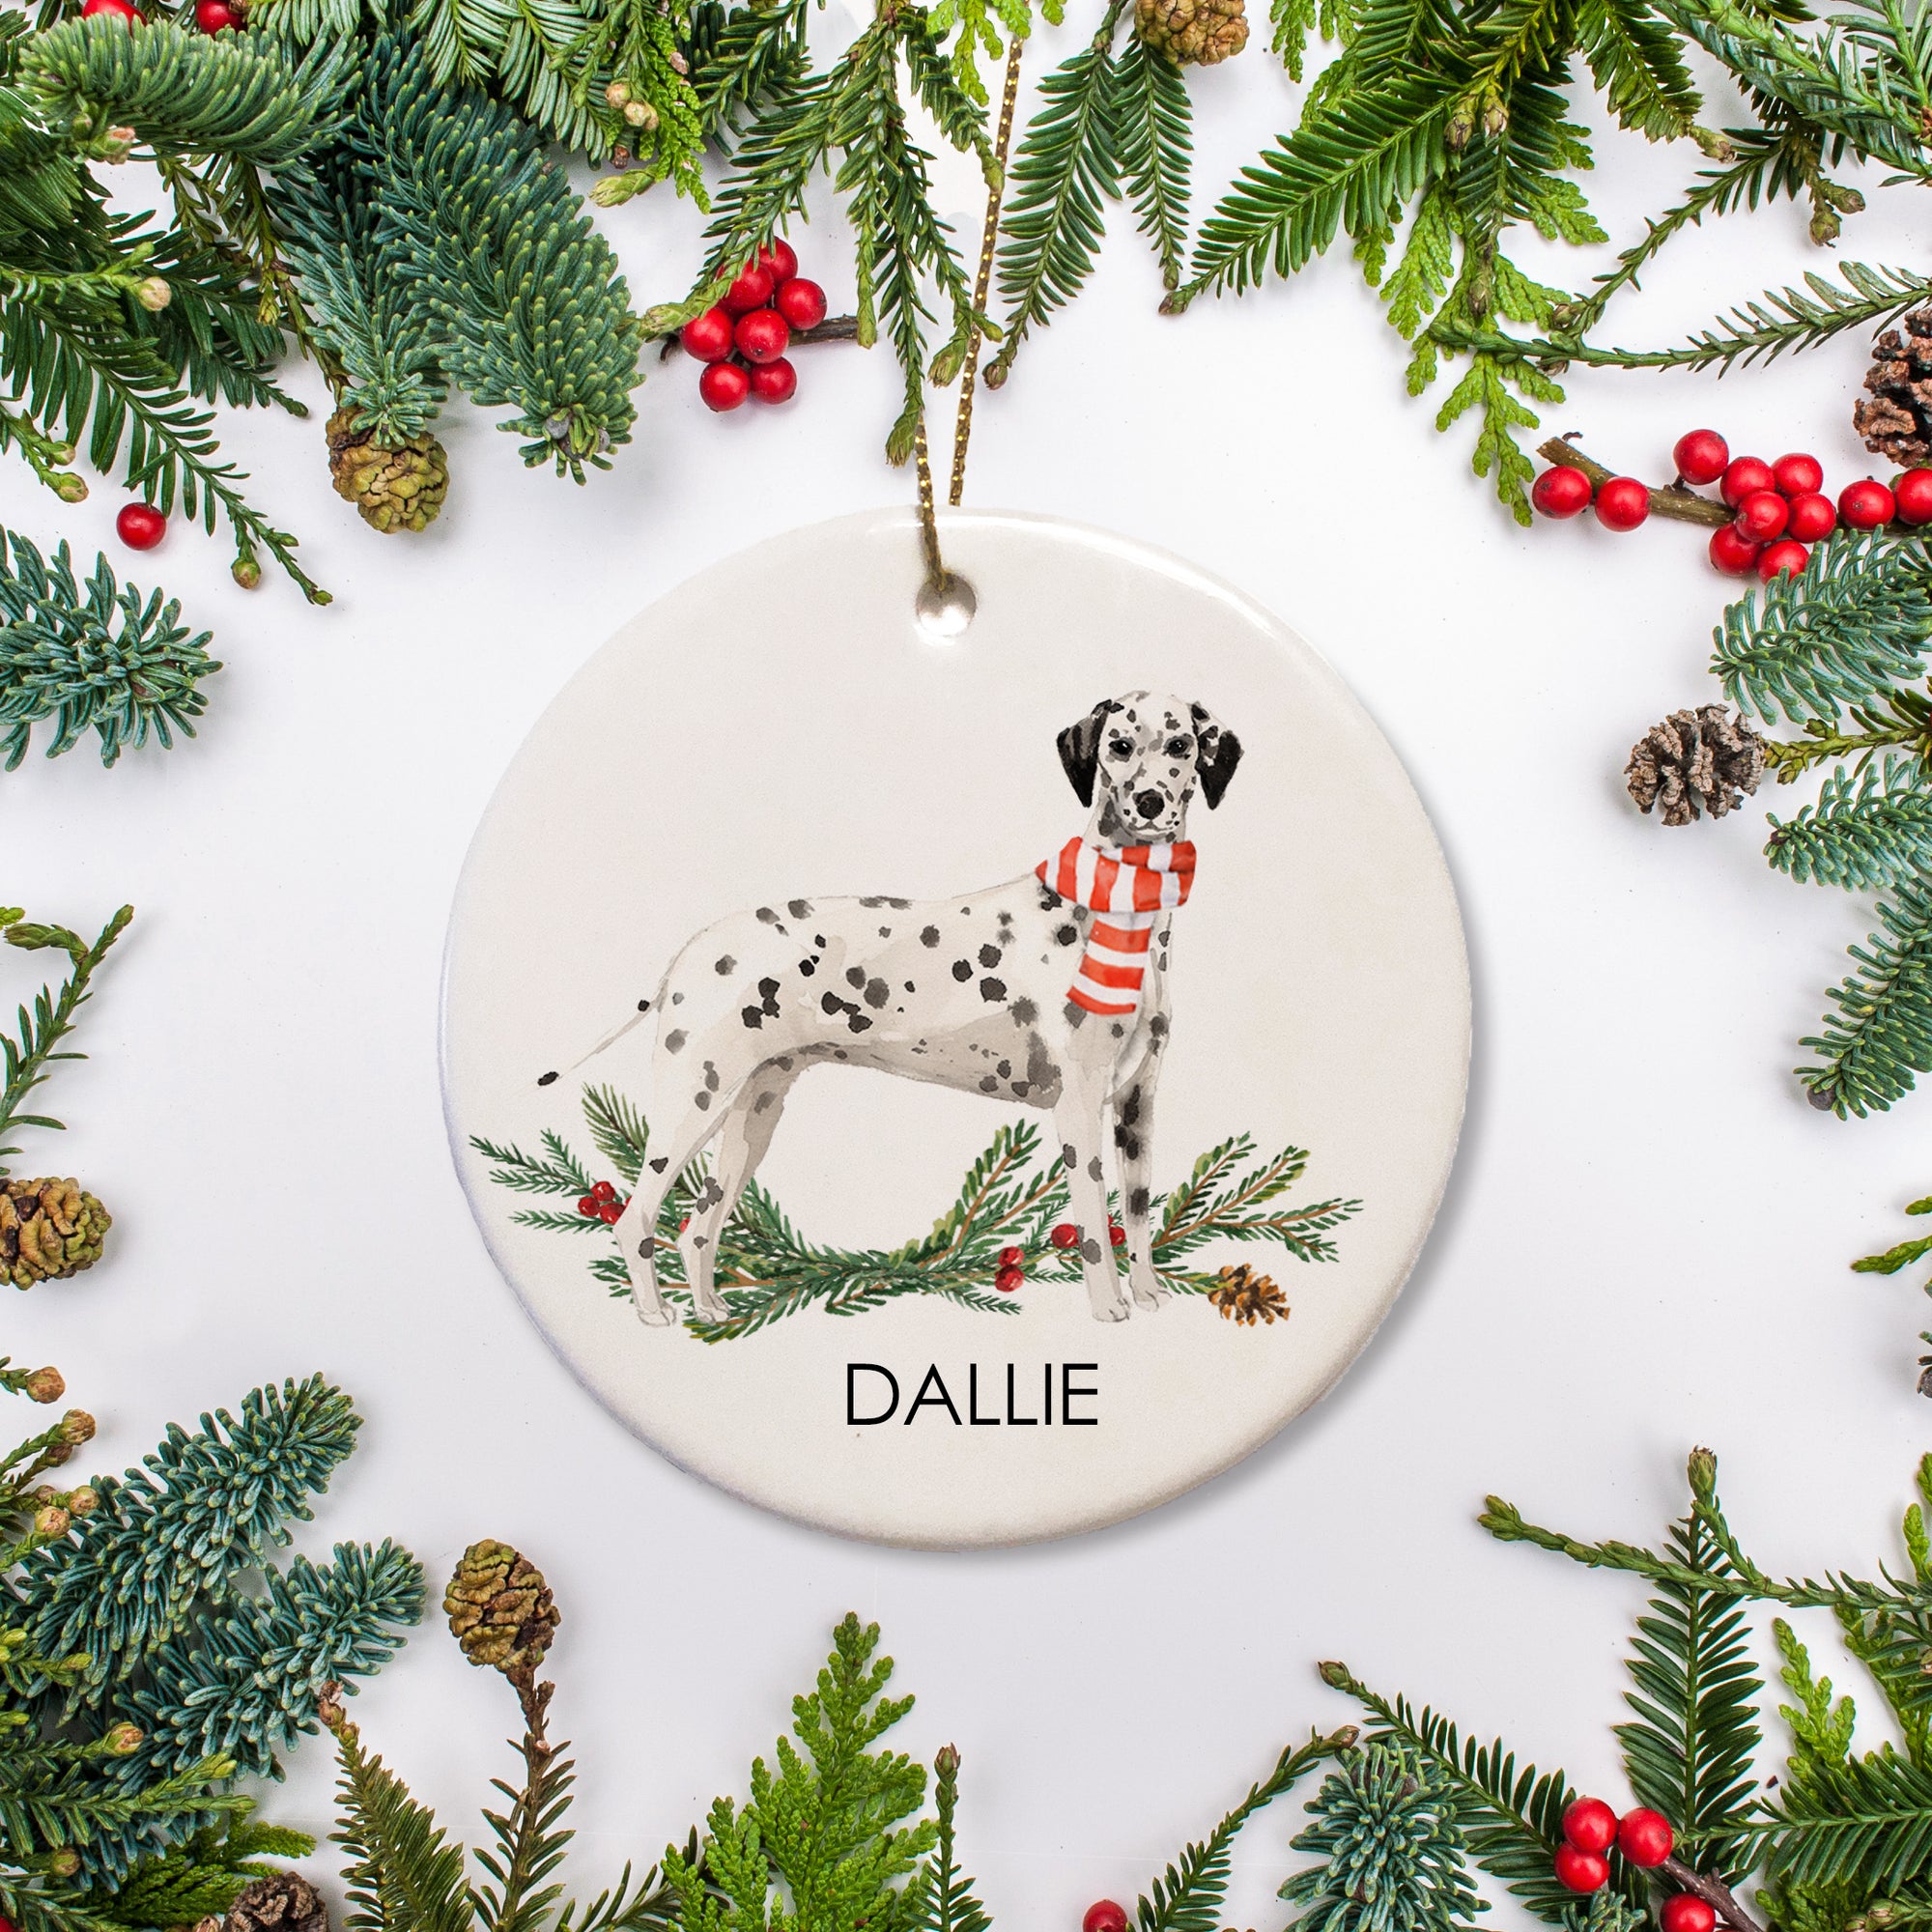 This ornament offers a personalized design that includes your beloved Dalmatian on a bed of holly. It's a fun gift for a friend or family member with a Dalmatian, but can also be used as a memorial when a loved pet passes.